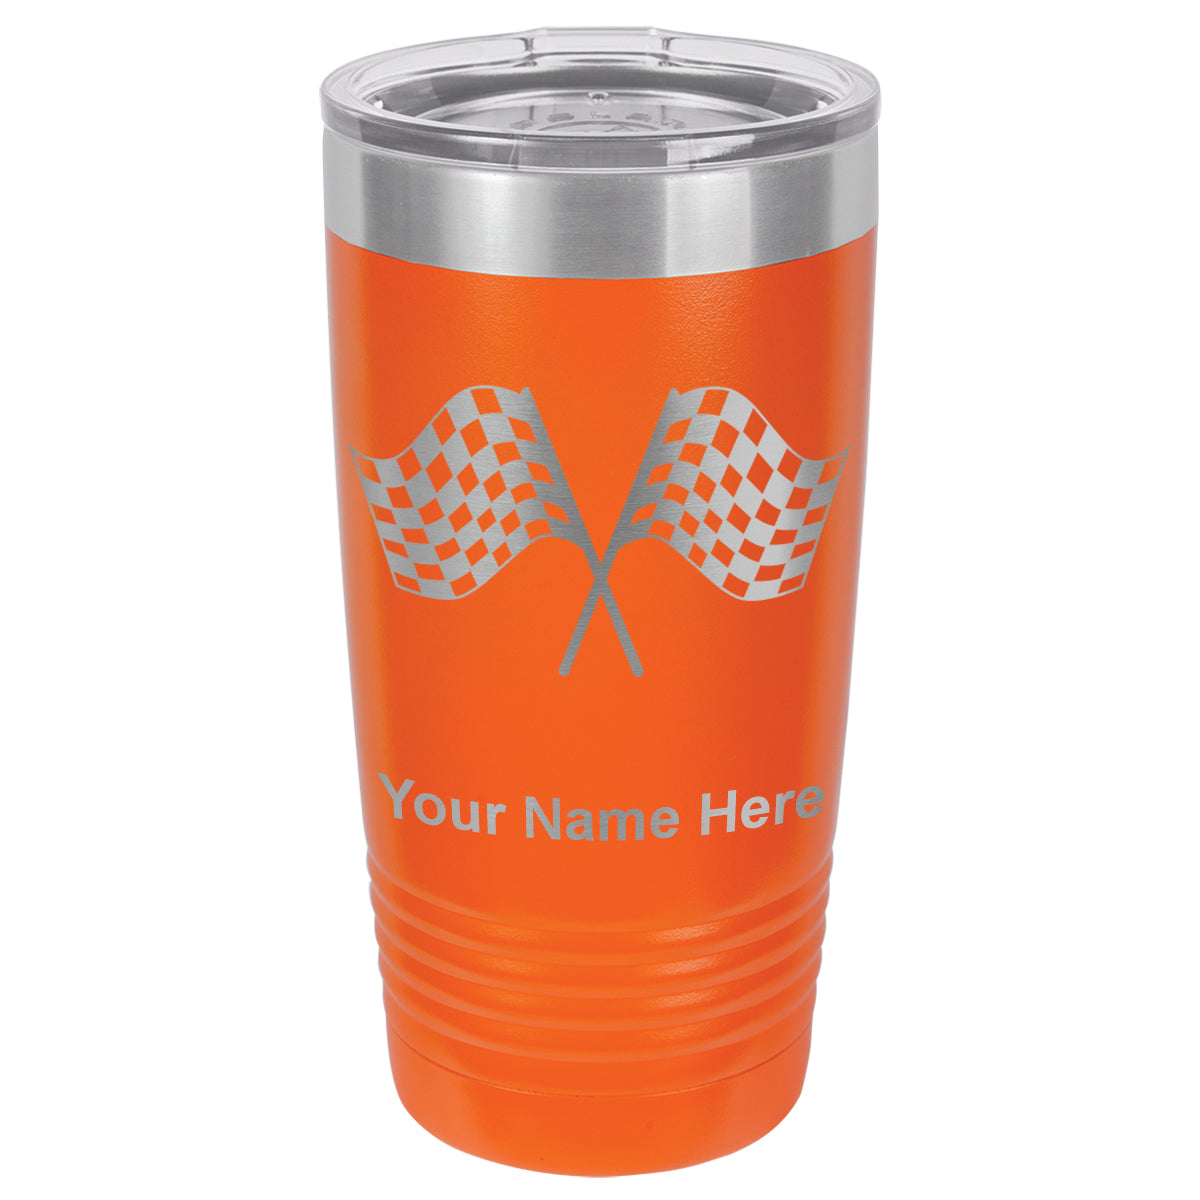 20oz Vacuum Insulated Tumbler Mug, Racing Flags, Personalized Engraving Included